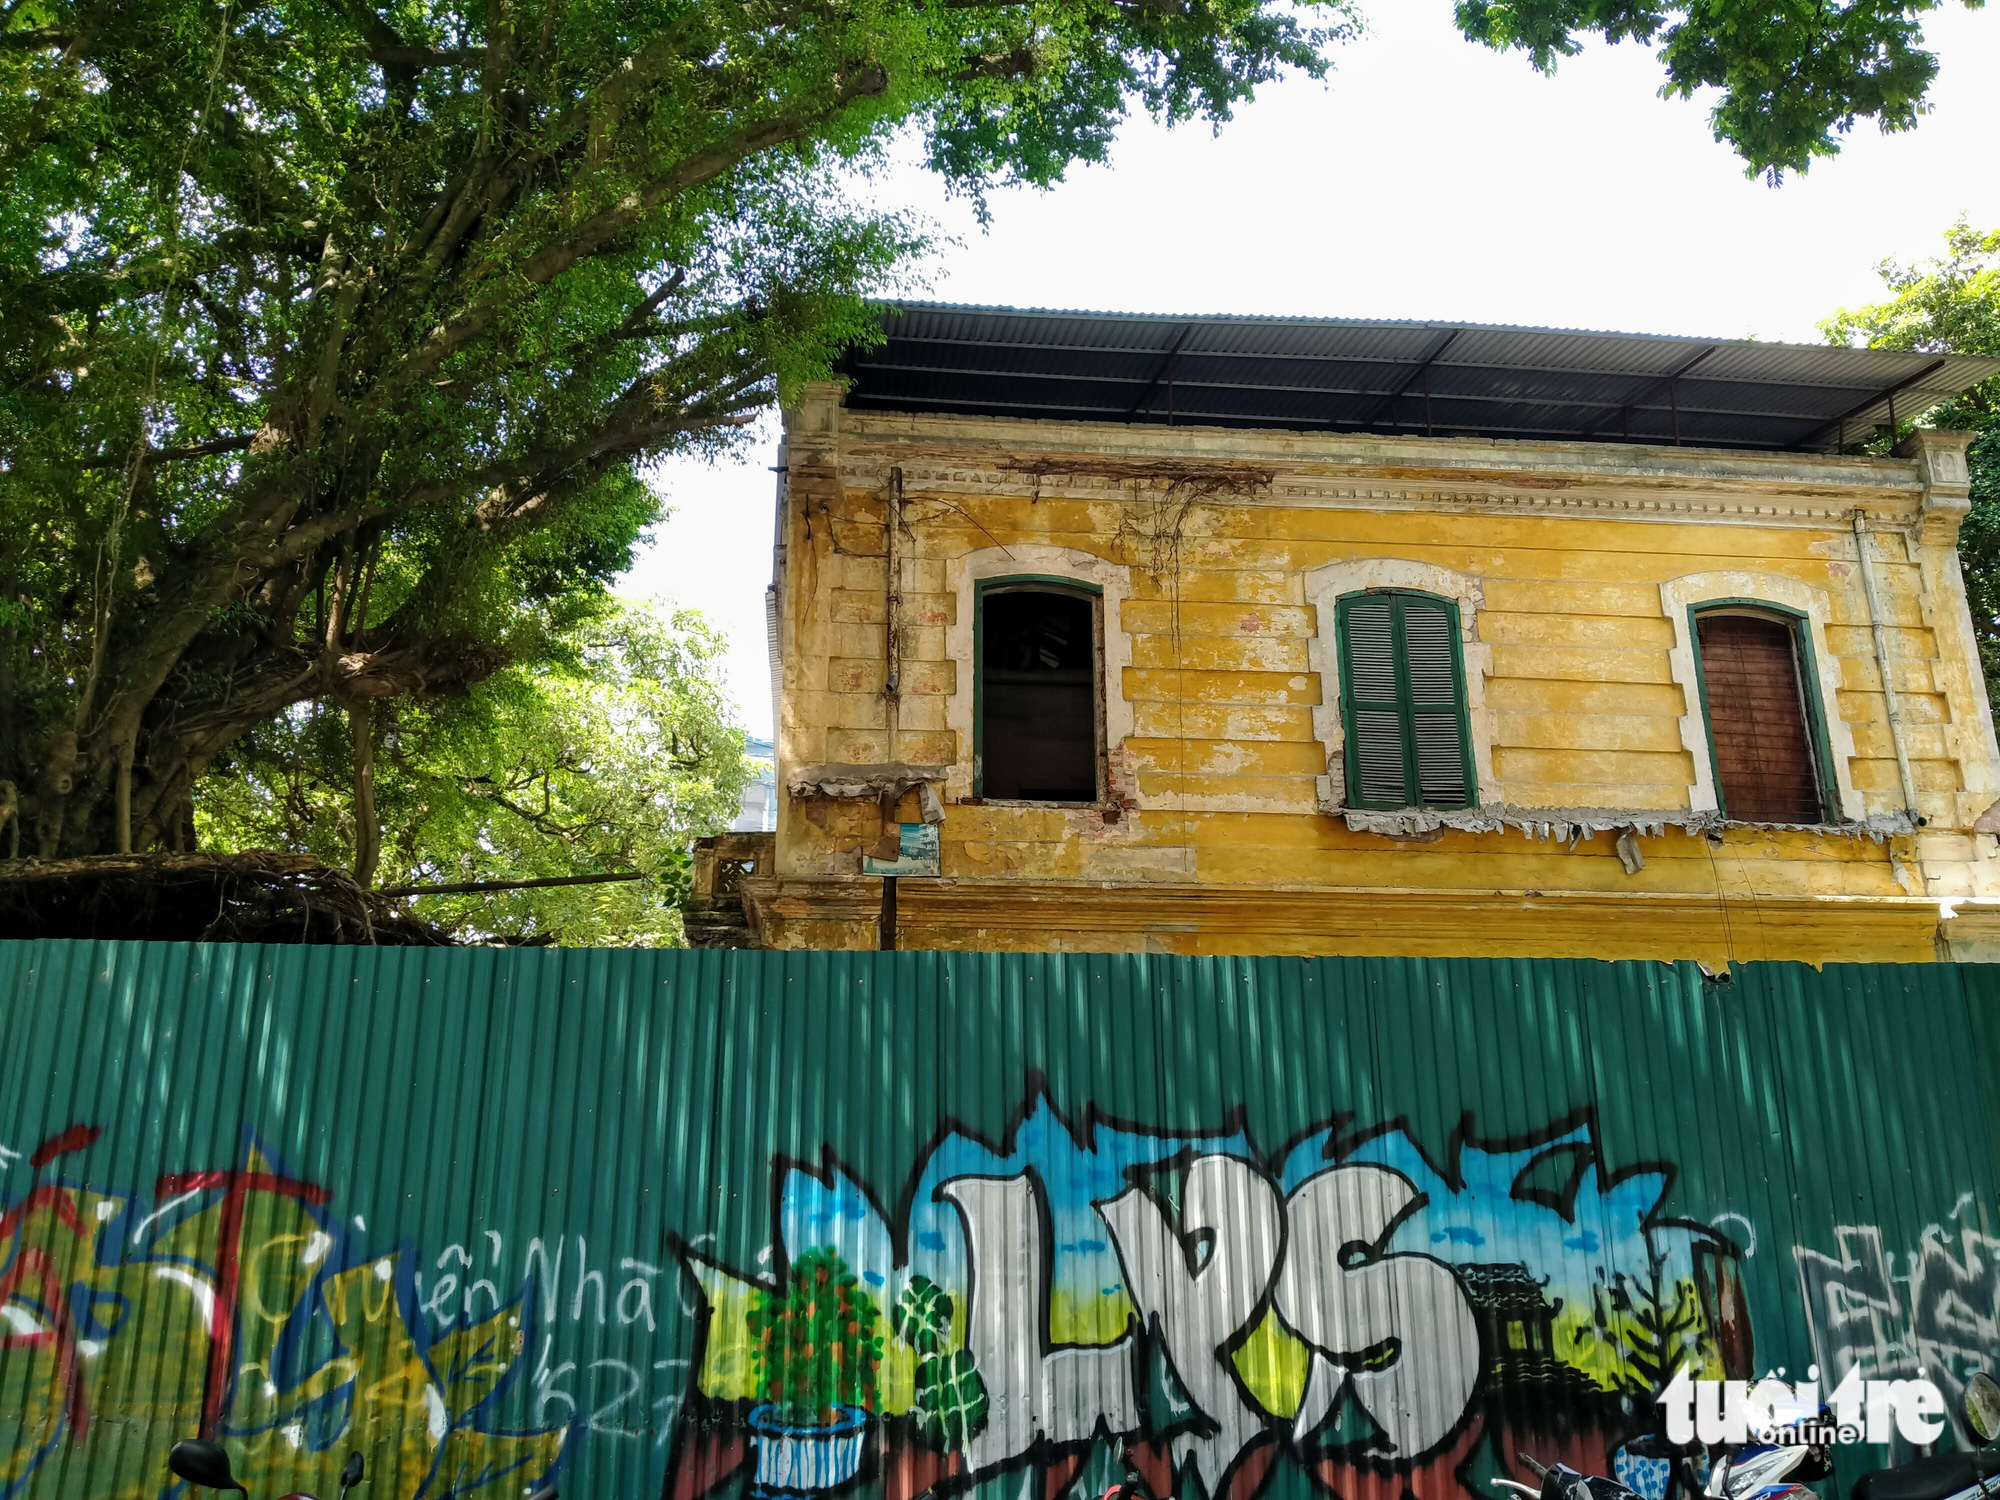 The old French villa at 49 Tran Hung Dao Street in Hoan Kiem District, Hanoi is photographed before its revamp. Photo: T. Dieu / Tuoi Tre